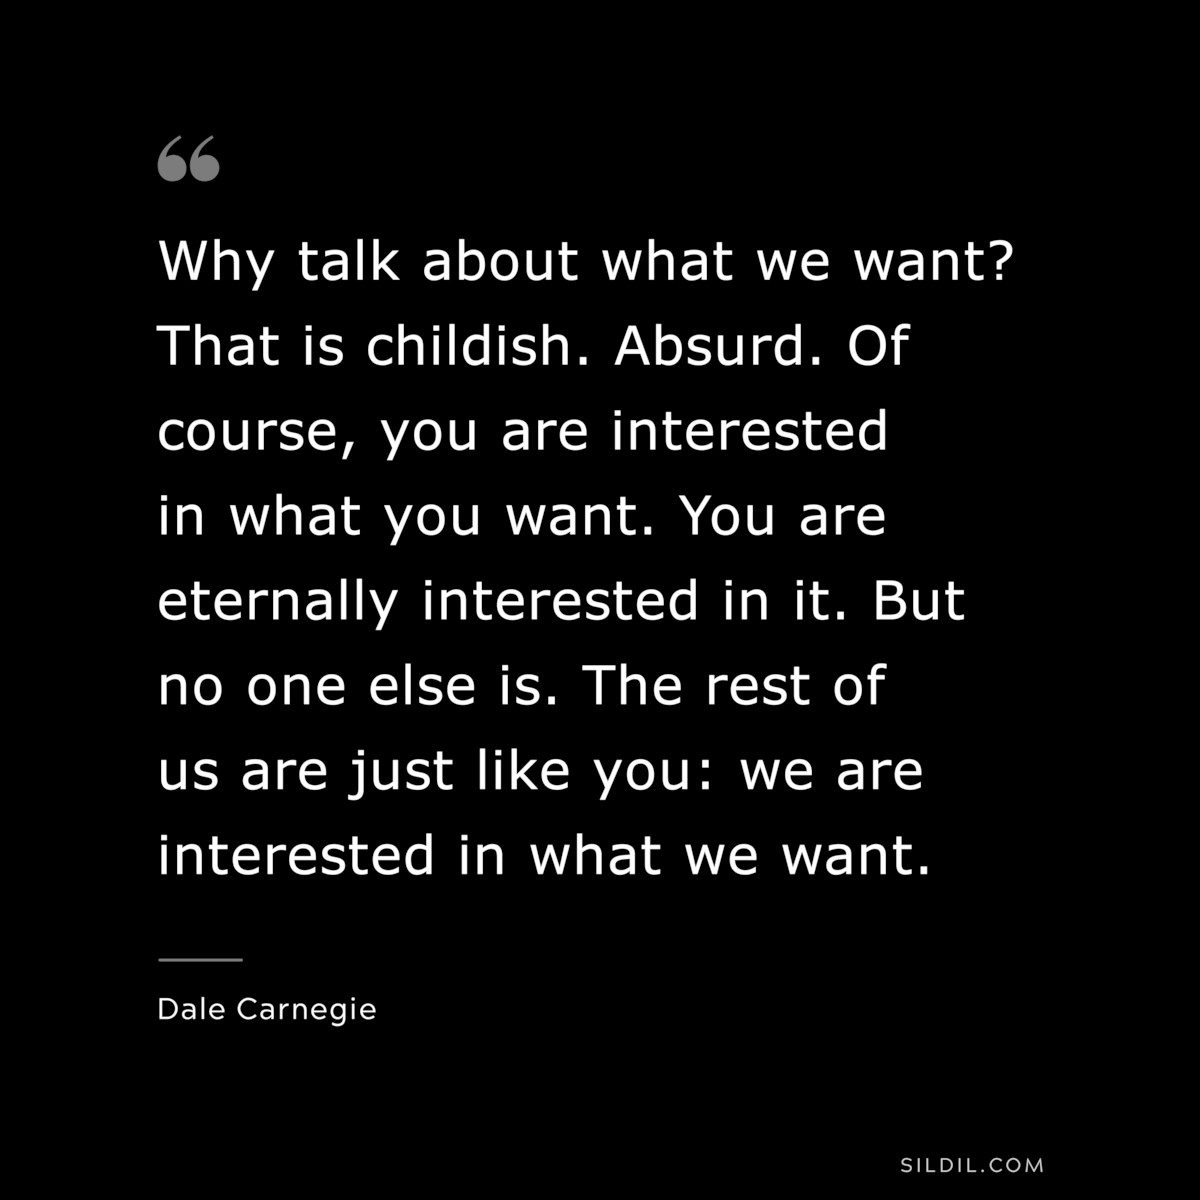 Why talk about what we want? That is childish. Absurd. Of course, you are interested in what you want. You are eternally interested in it. But no one else is. The rest of us are just like you: we are interested in what we want.― Dale Carnegie